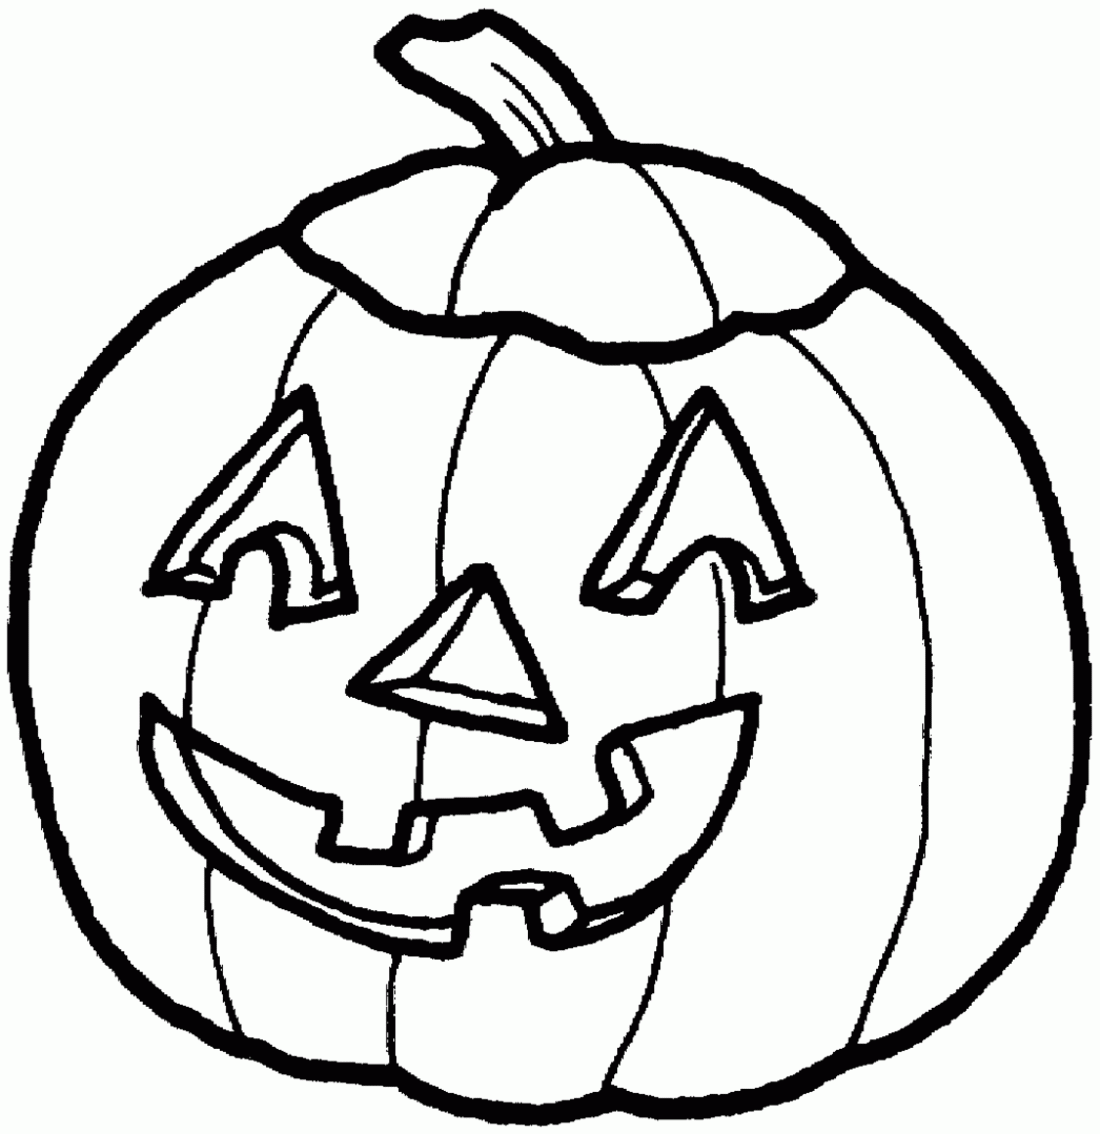 Download Free Printable Pumpkin Coloring Pages For Kids